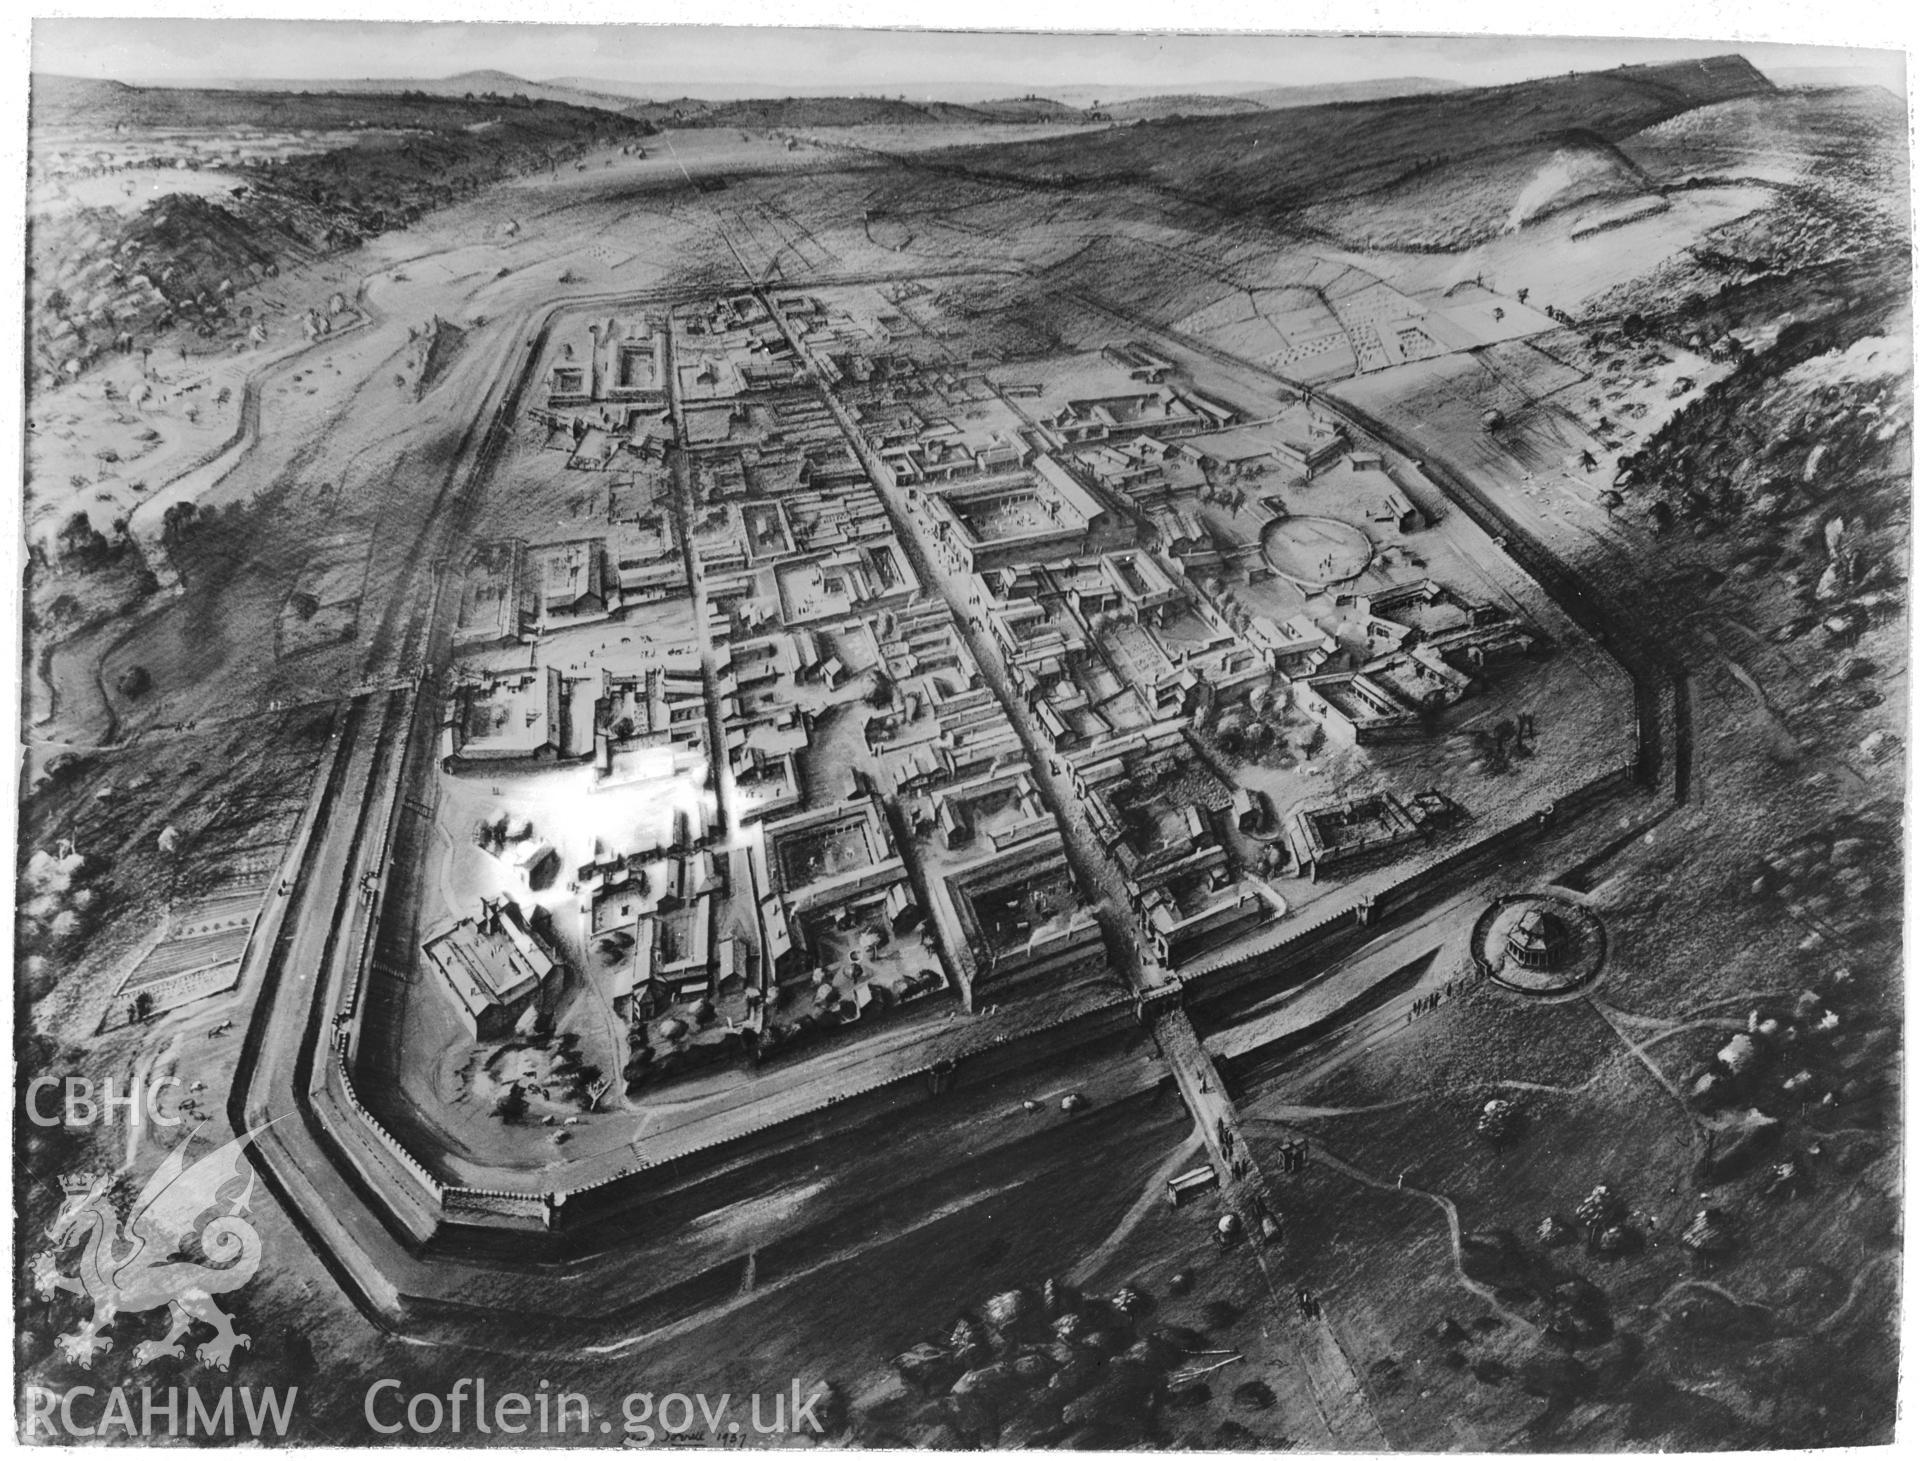 Photographic copy of a reconstruction drawing of Caerwent Roman City.